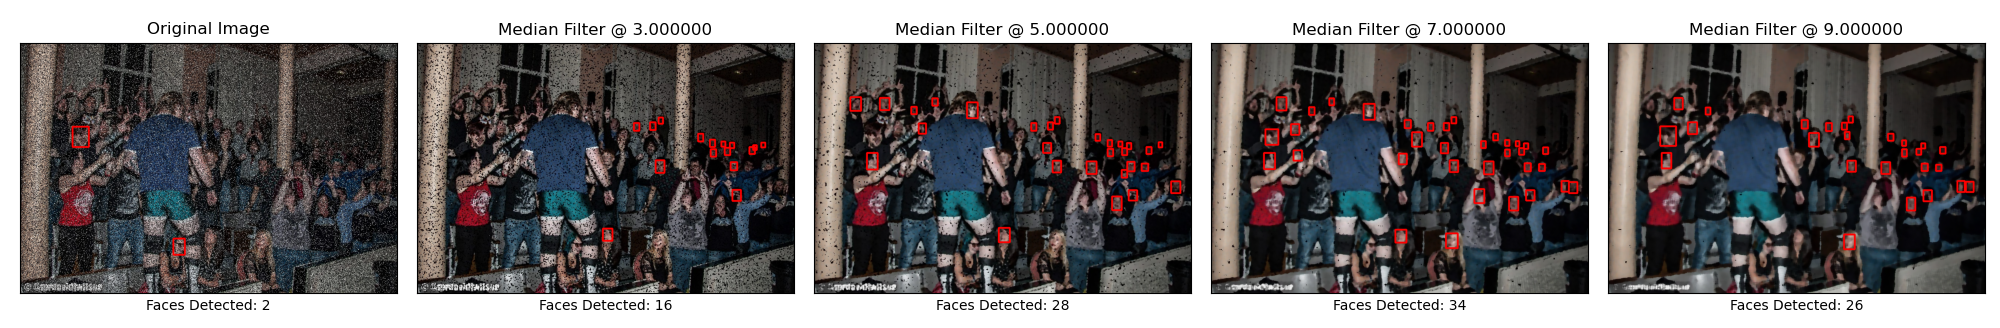 Example of median filter recovering detections from a image at a higher salt & pepper intensity